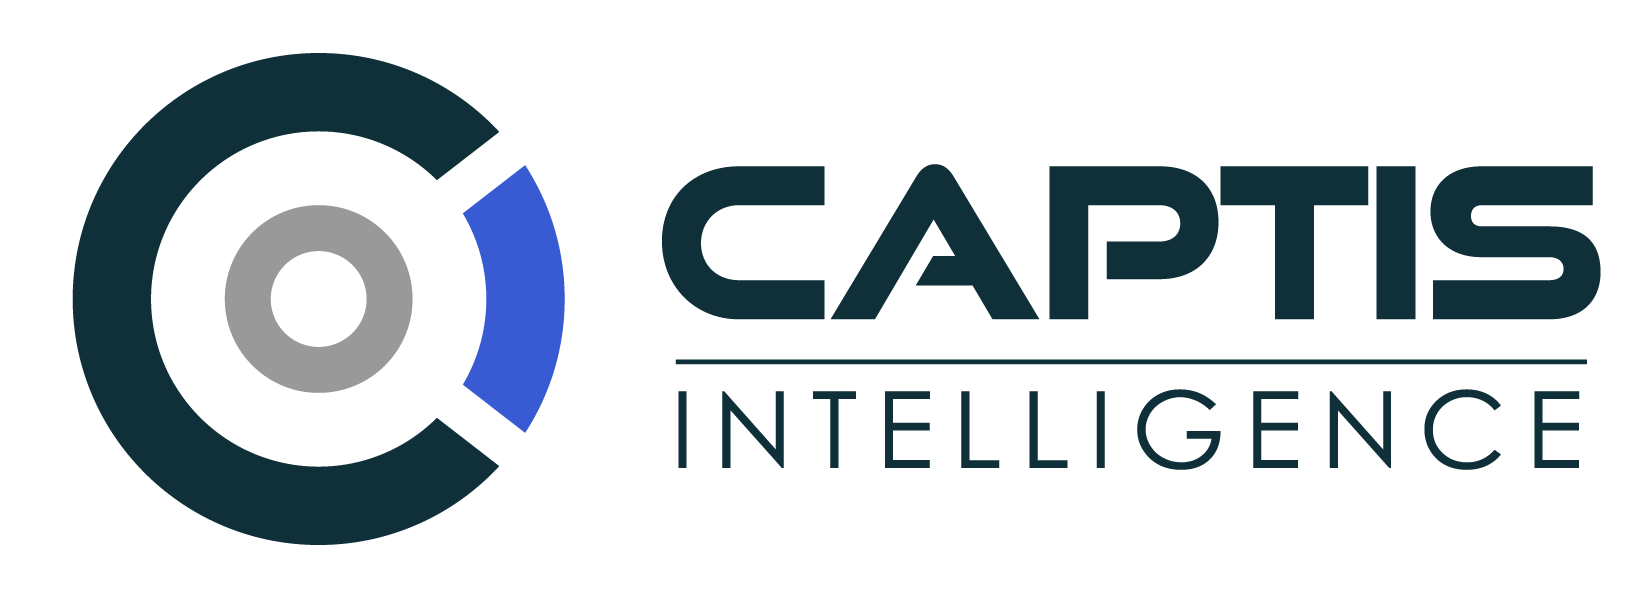 Captis Intelligence, Friday, February 21, 2020, Press release picture